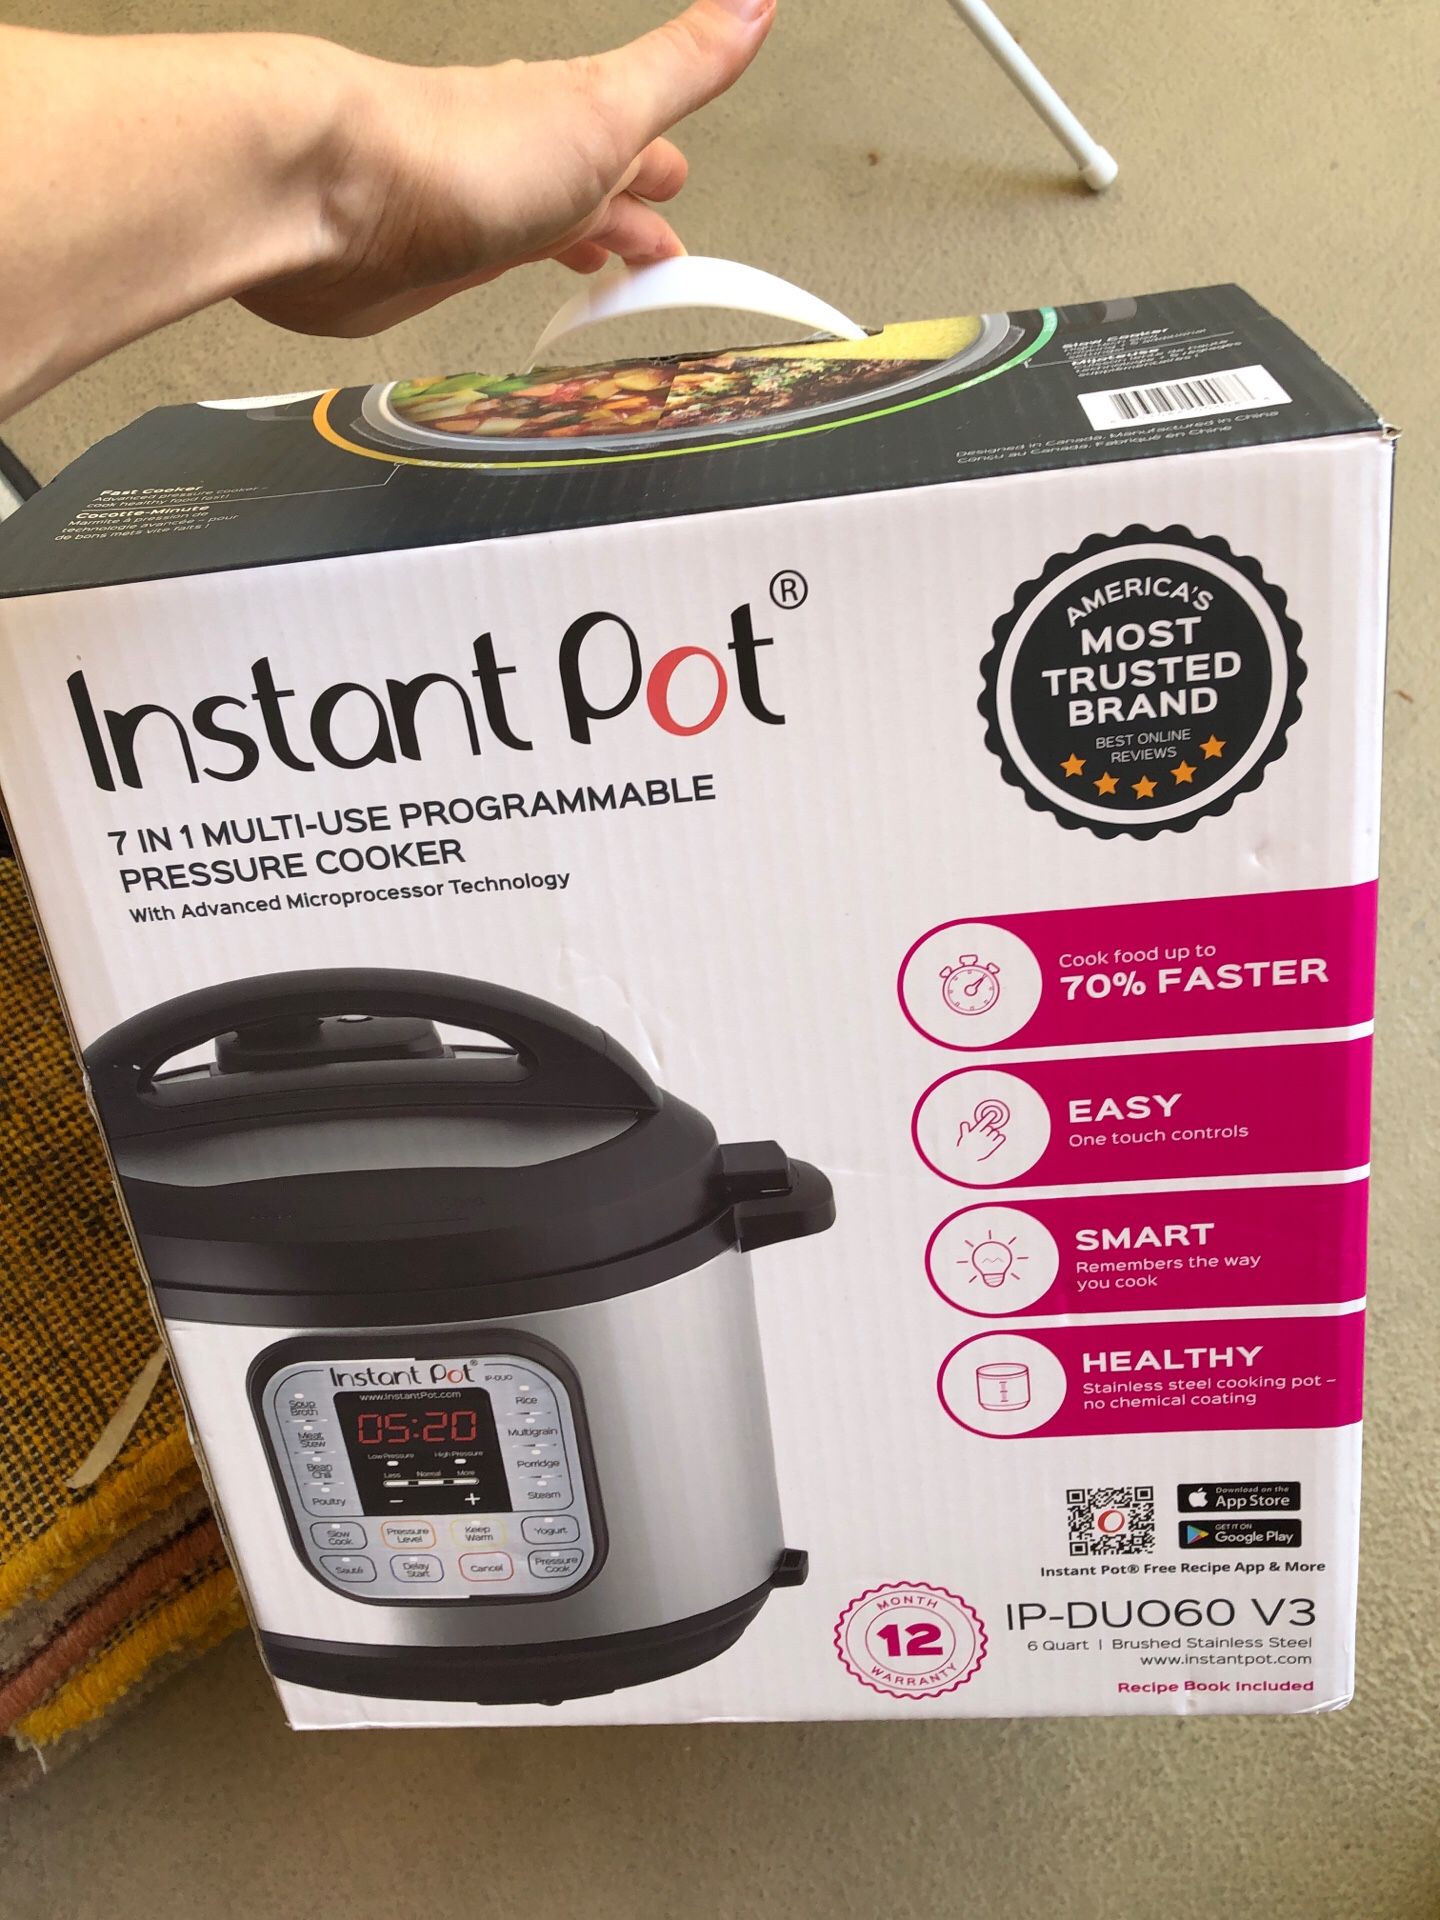 Instant pot for spare parts